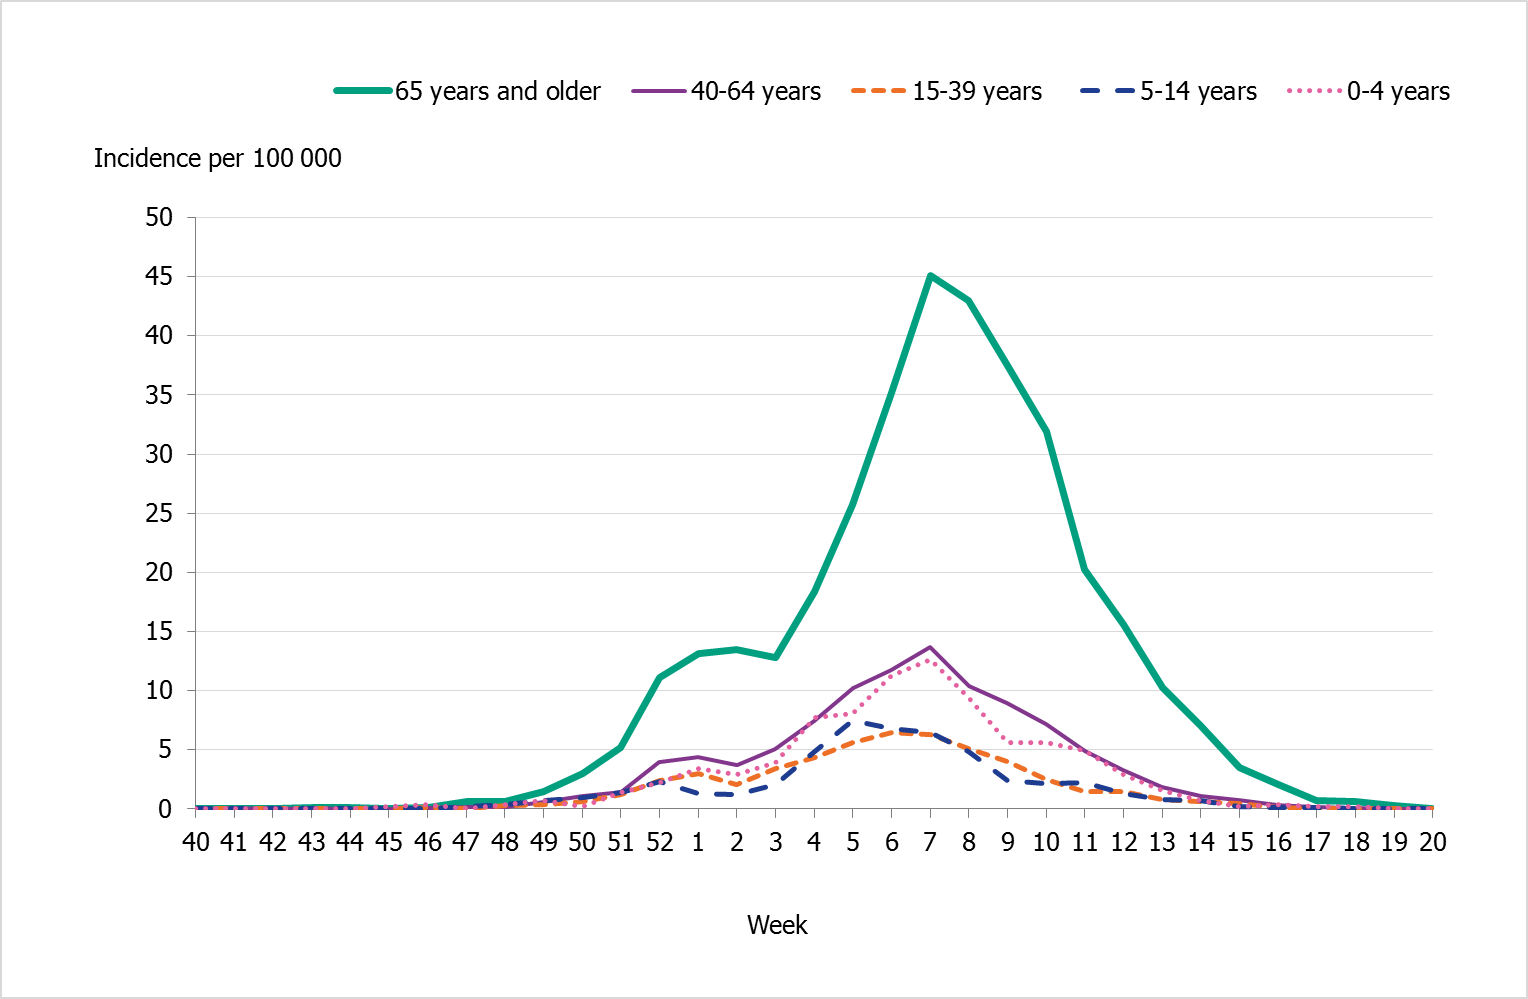 Weekly incidence of influenza B per age group in Sweden, 2017–2018 season. The line for those 65 years and older is by far the highest and reaches a peak at around 45 per 100,000, whereas the other age groups reach no higher than 14 per 100,000. 